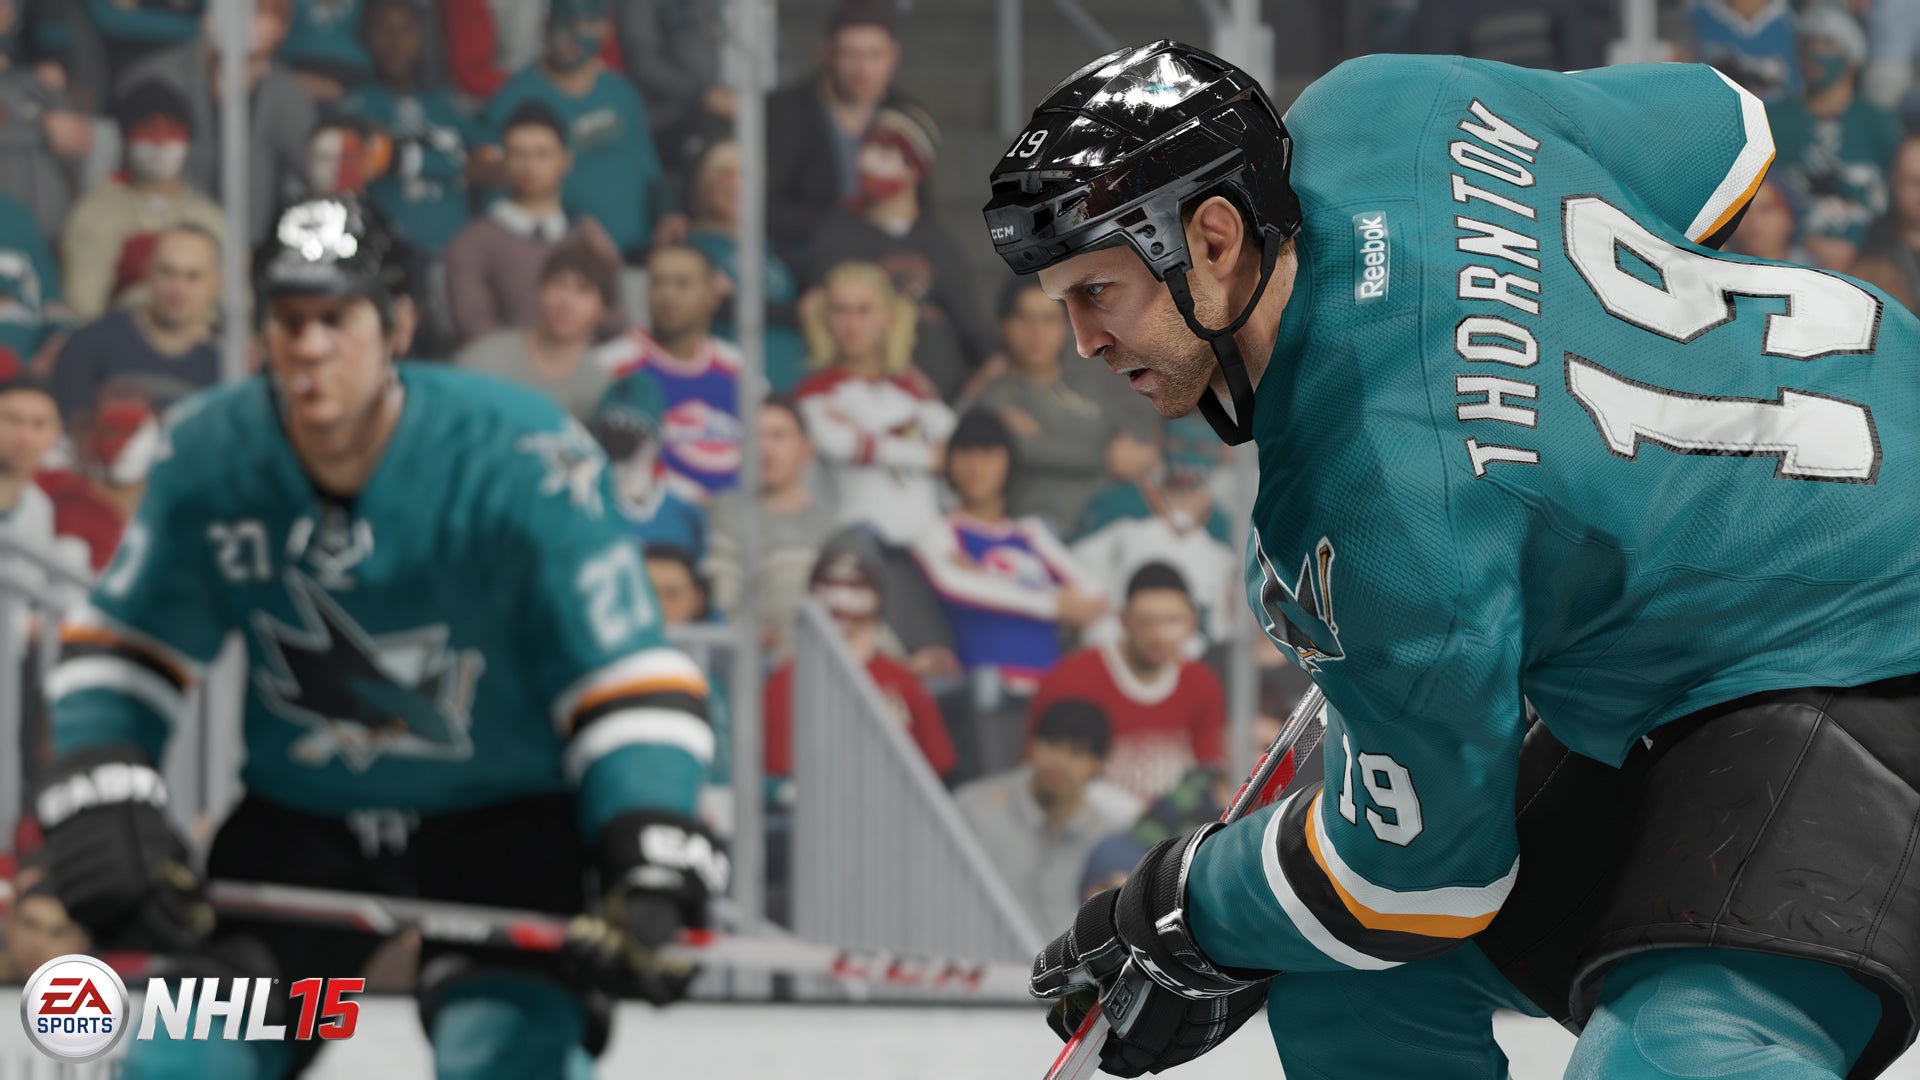 Image for This NHL 15 gameplay trailer shows the next-generation of hockey games